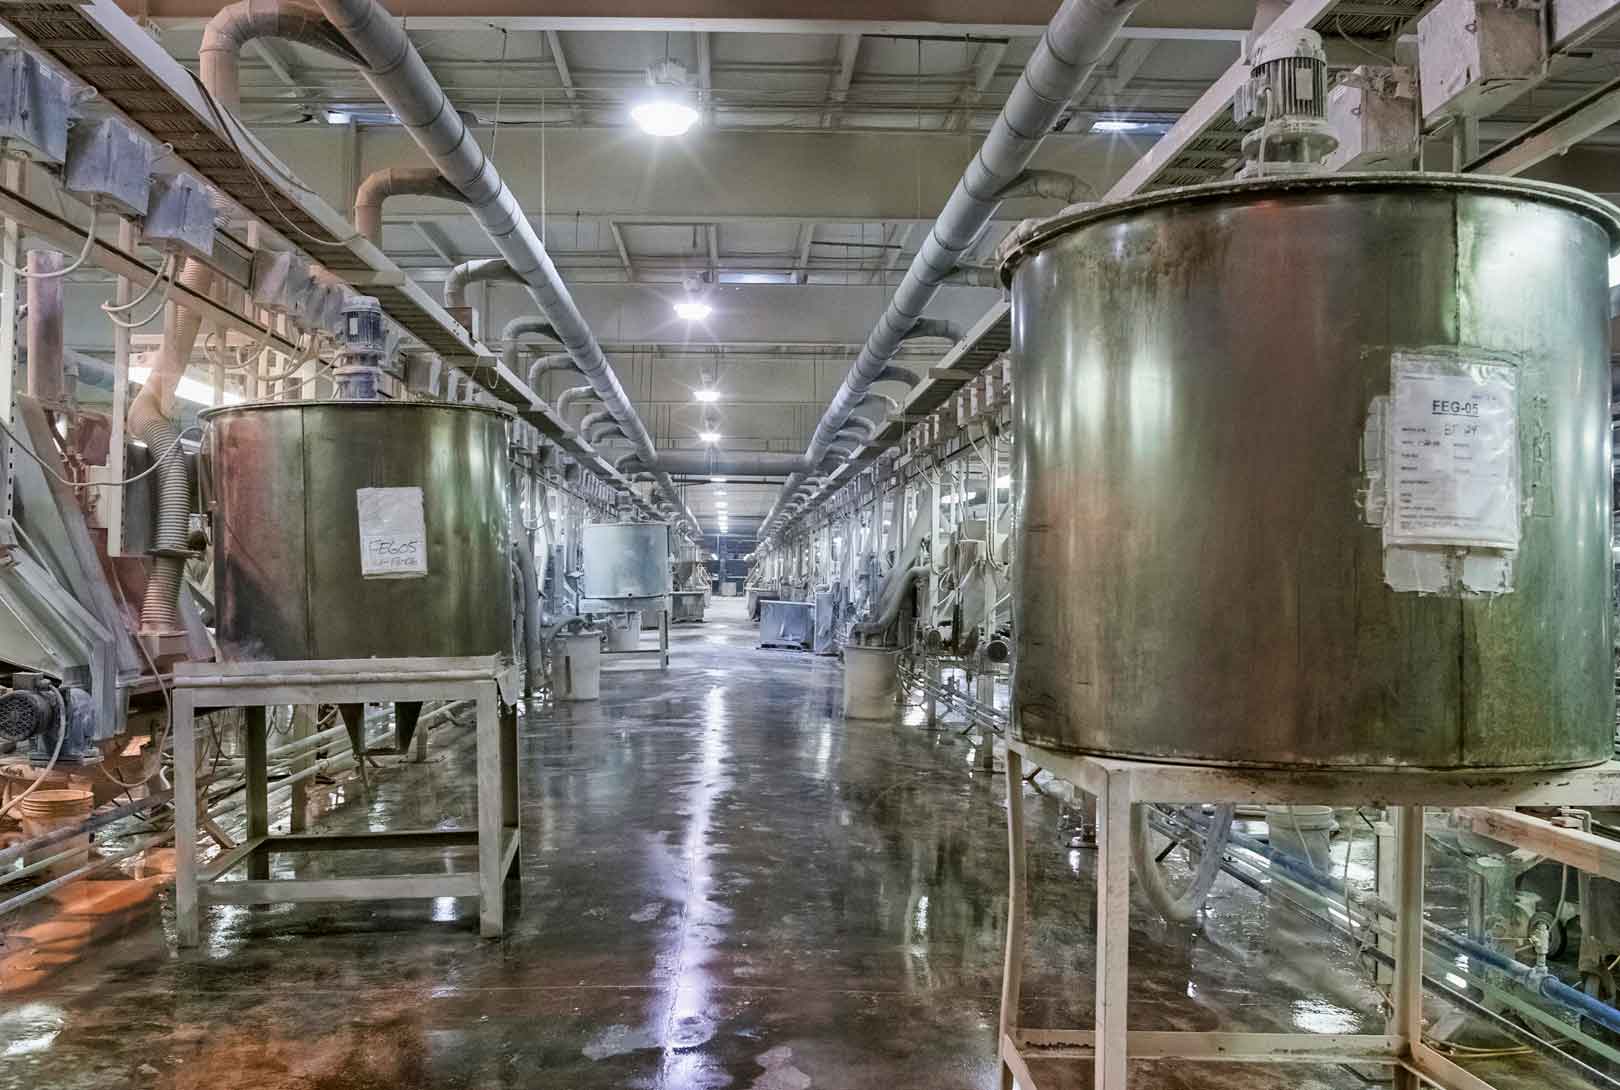 inside of tile manufacturing warehouse with rows of machinery, tanks, and hoses